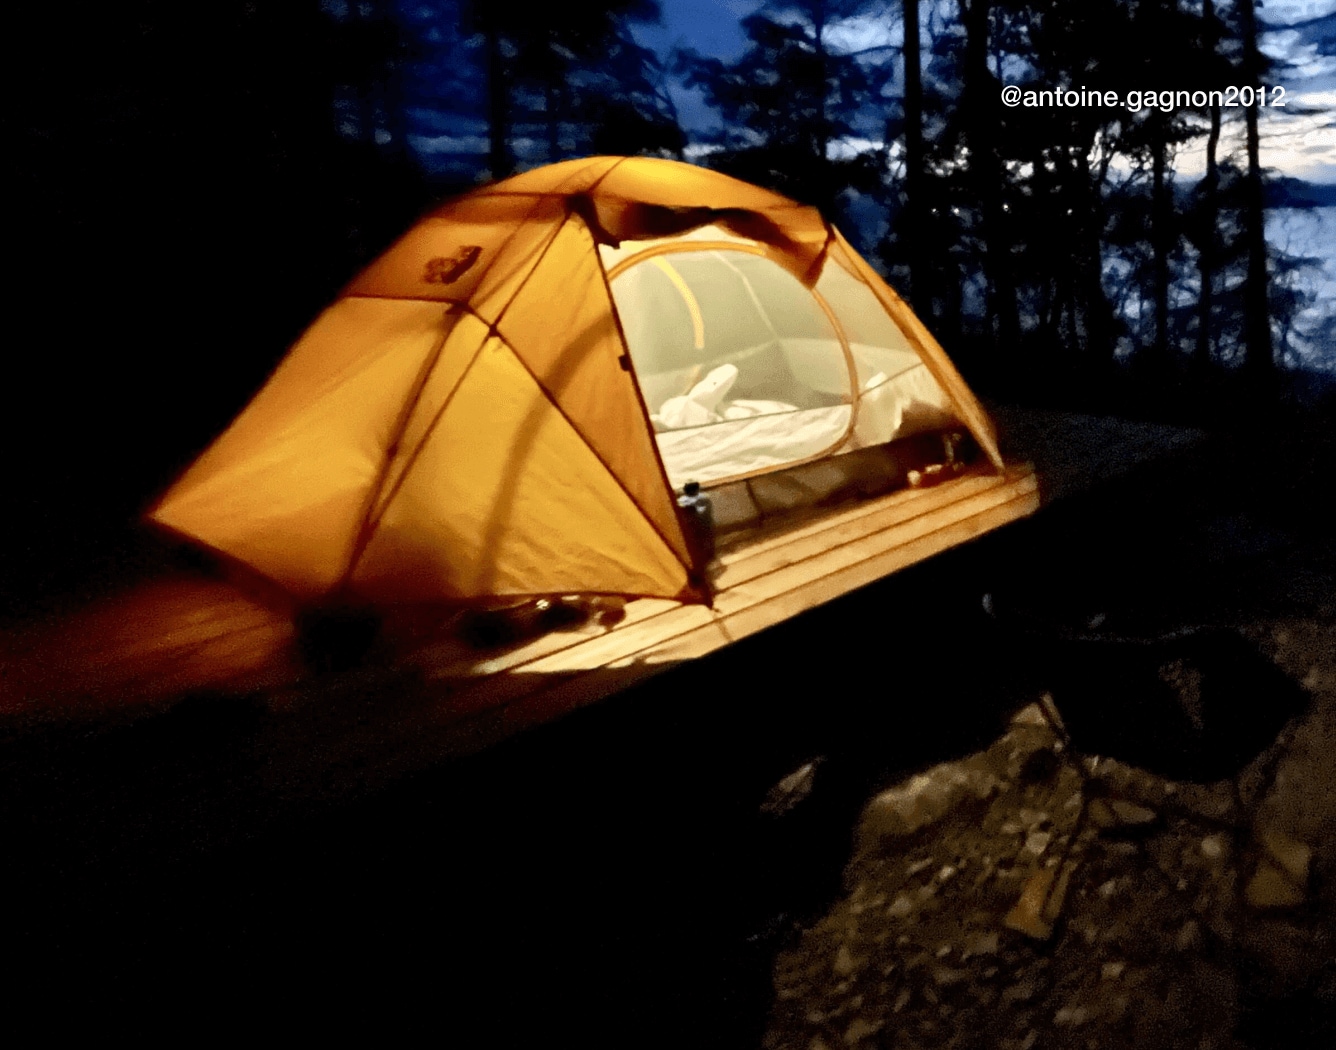 A tent from The North Face, lit up from within, set against a nighttime lake scene. UGC credit: @antoine.gagnon2012 